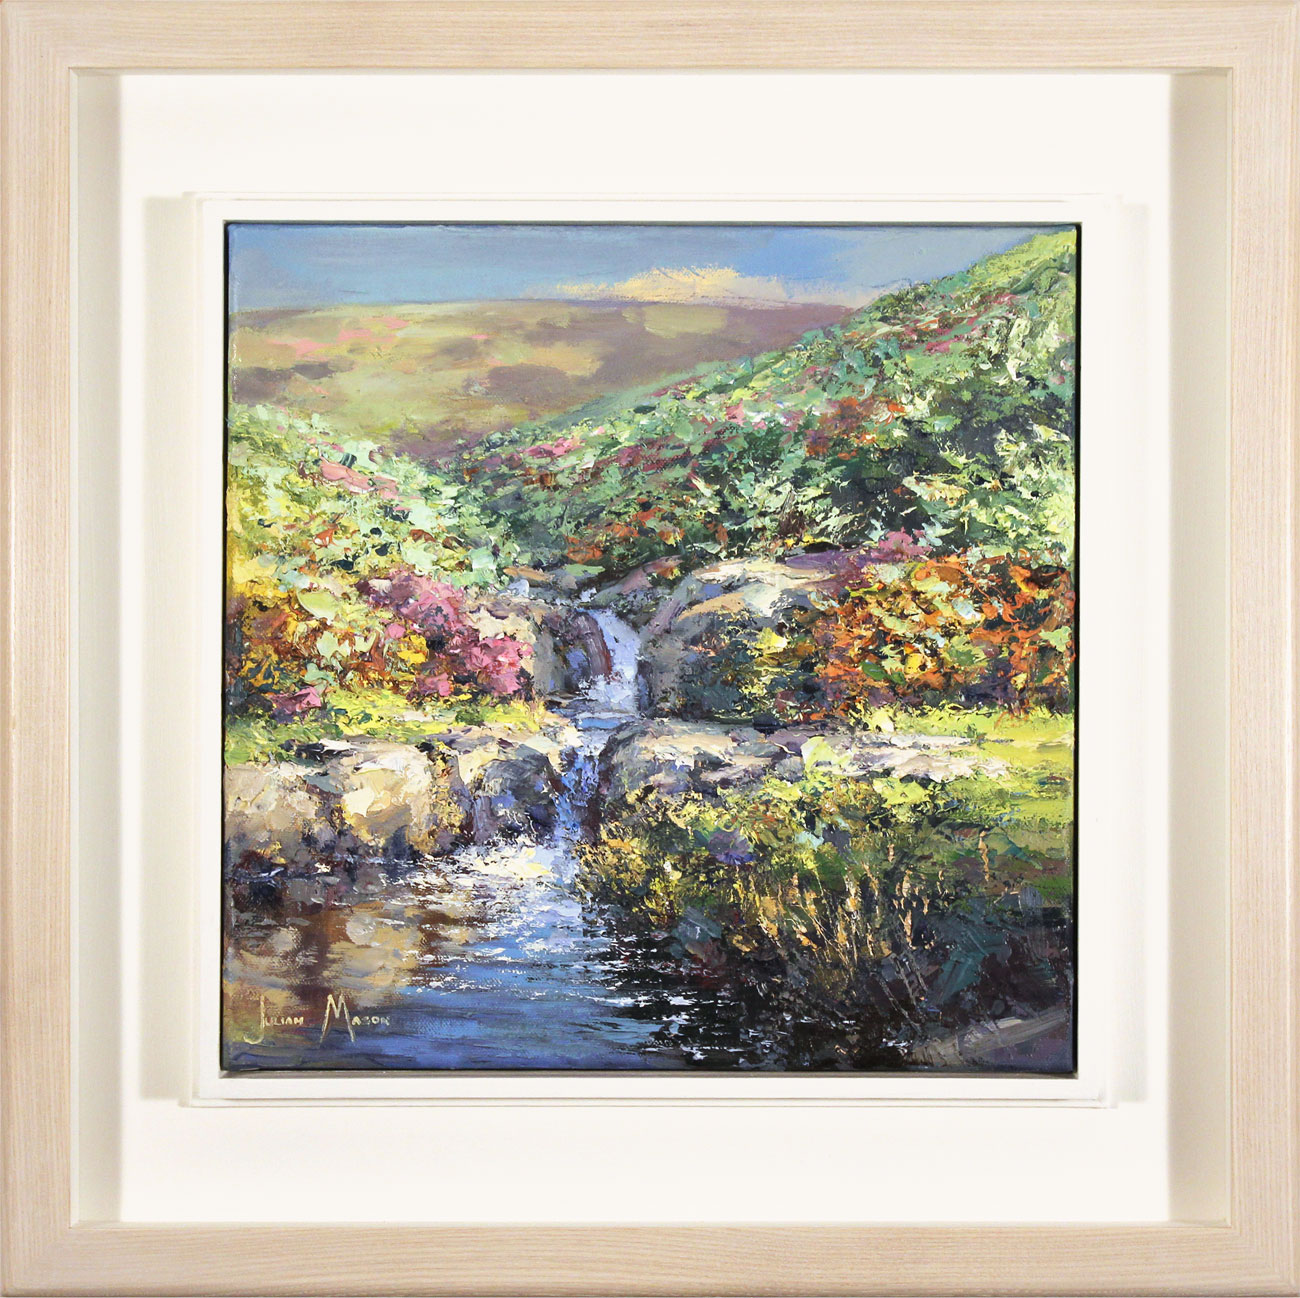 Julian Mason, Original oil painting on canvas, Highshaw Clough. Click to enlarge